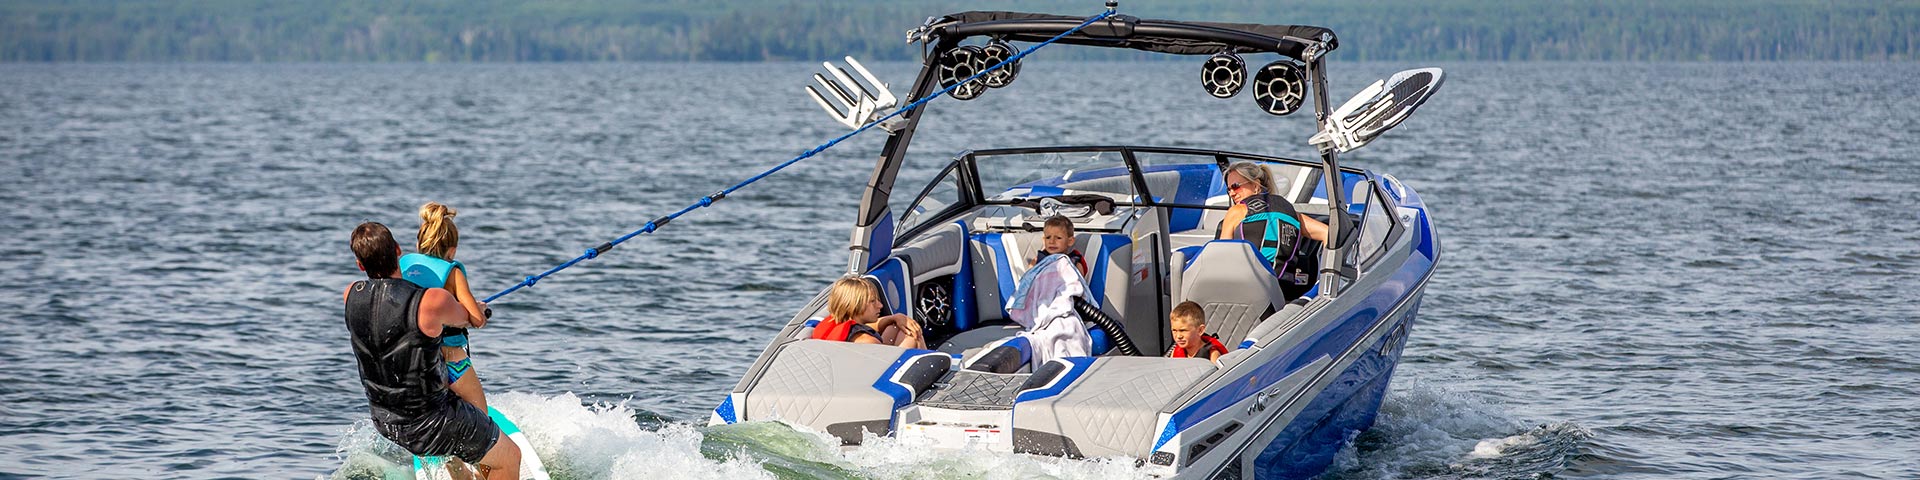 A family wake surfing behind a boat on a summer day on Waskesiu Lake in Prince Albert National Park.